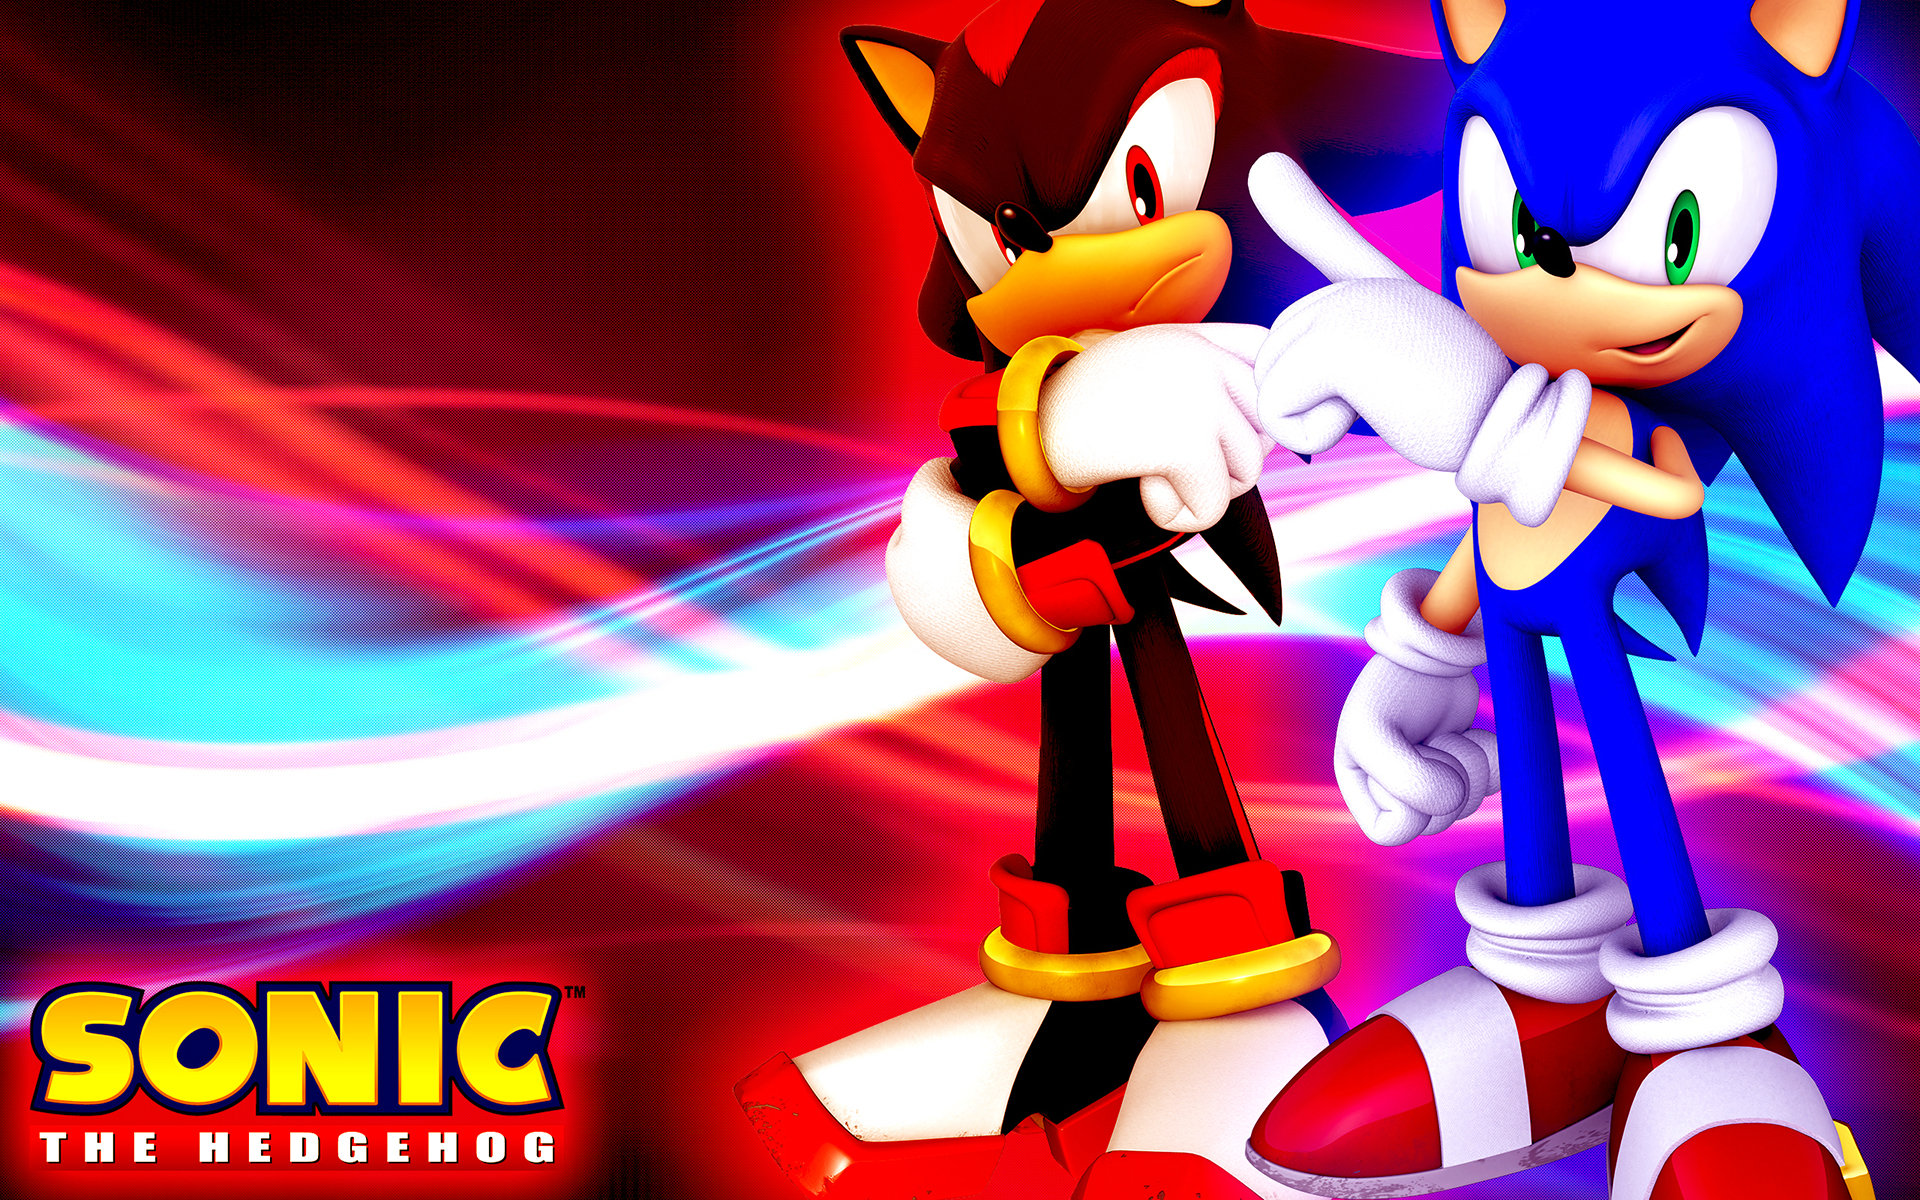 Sonic And Shadow Wallpaper by SonicTheHedgehogBG